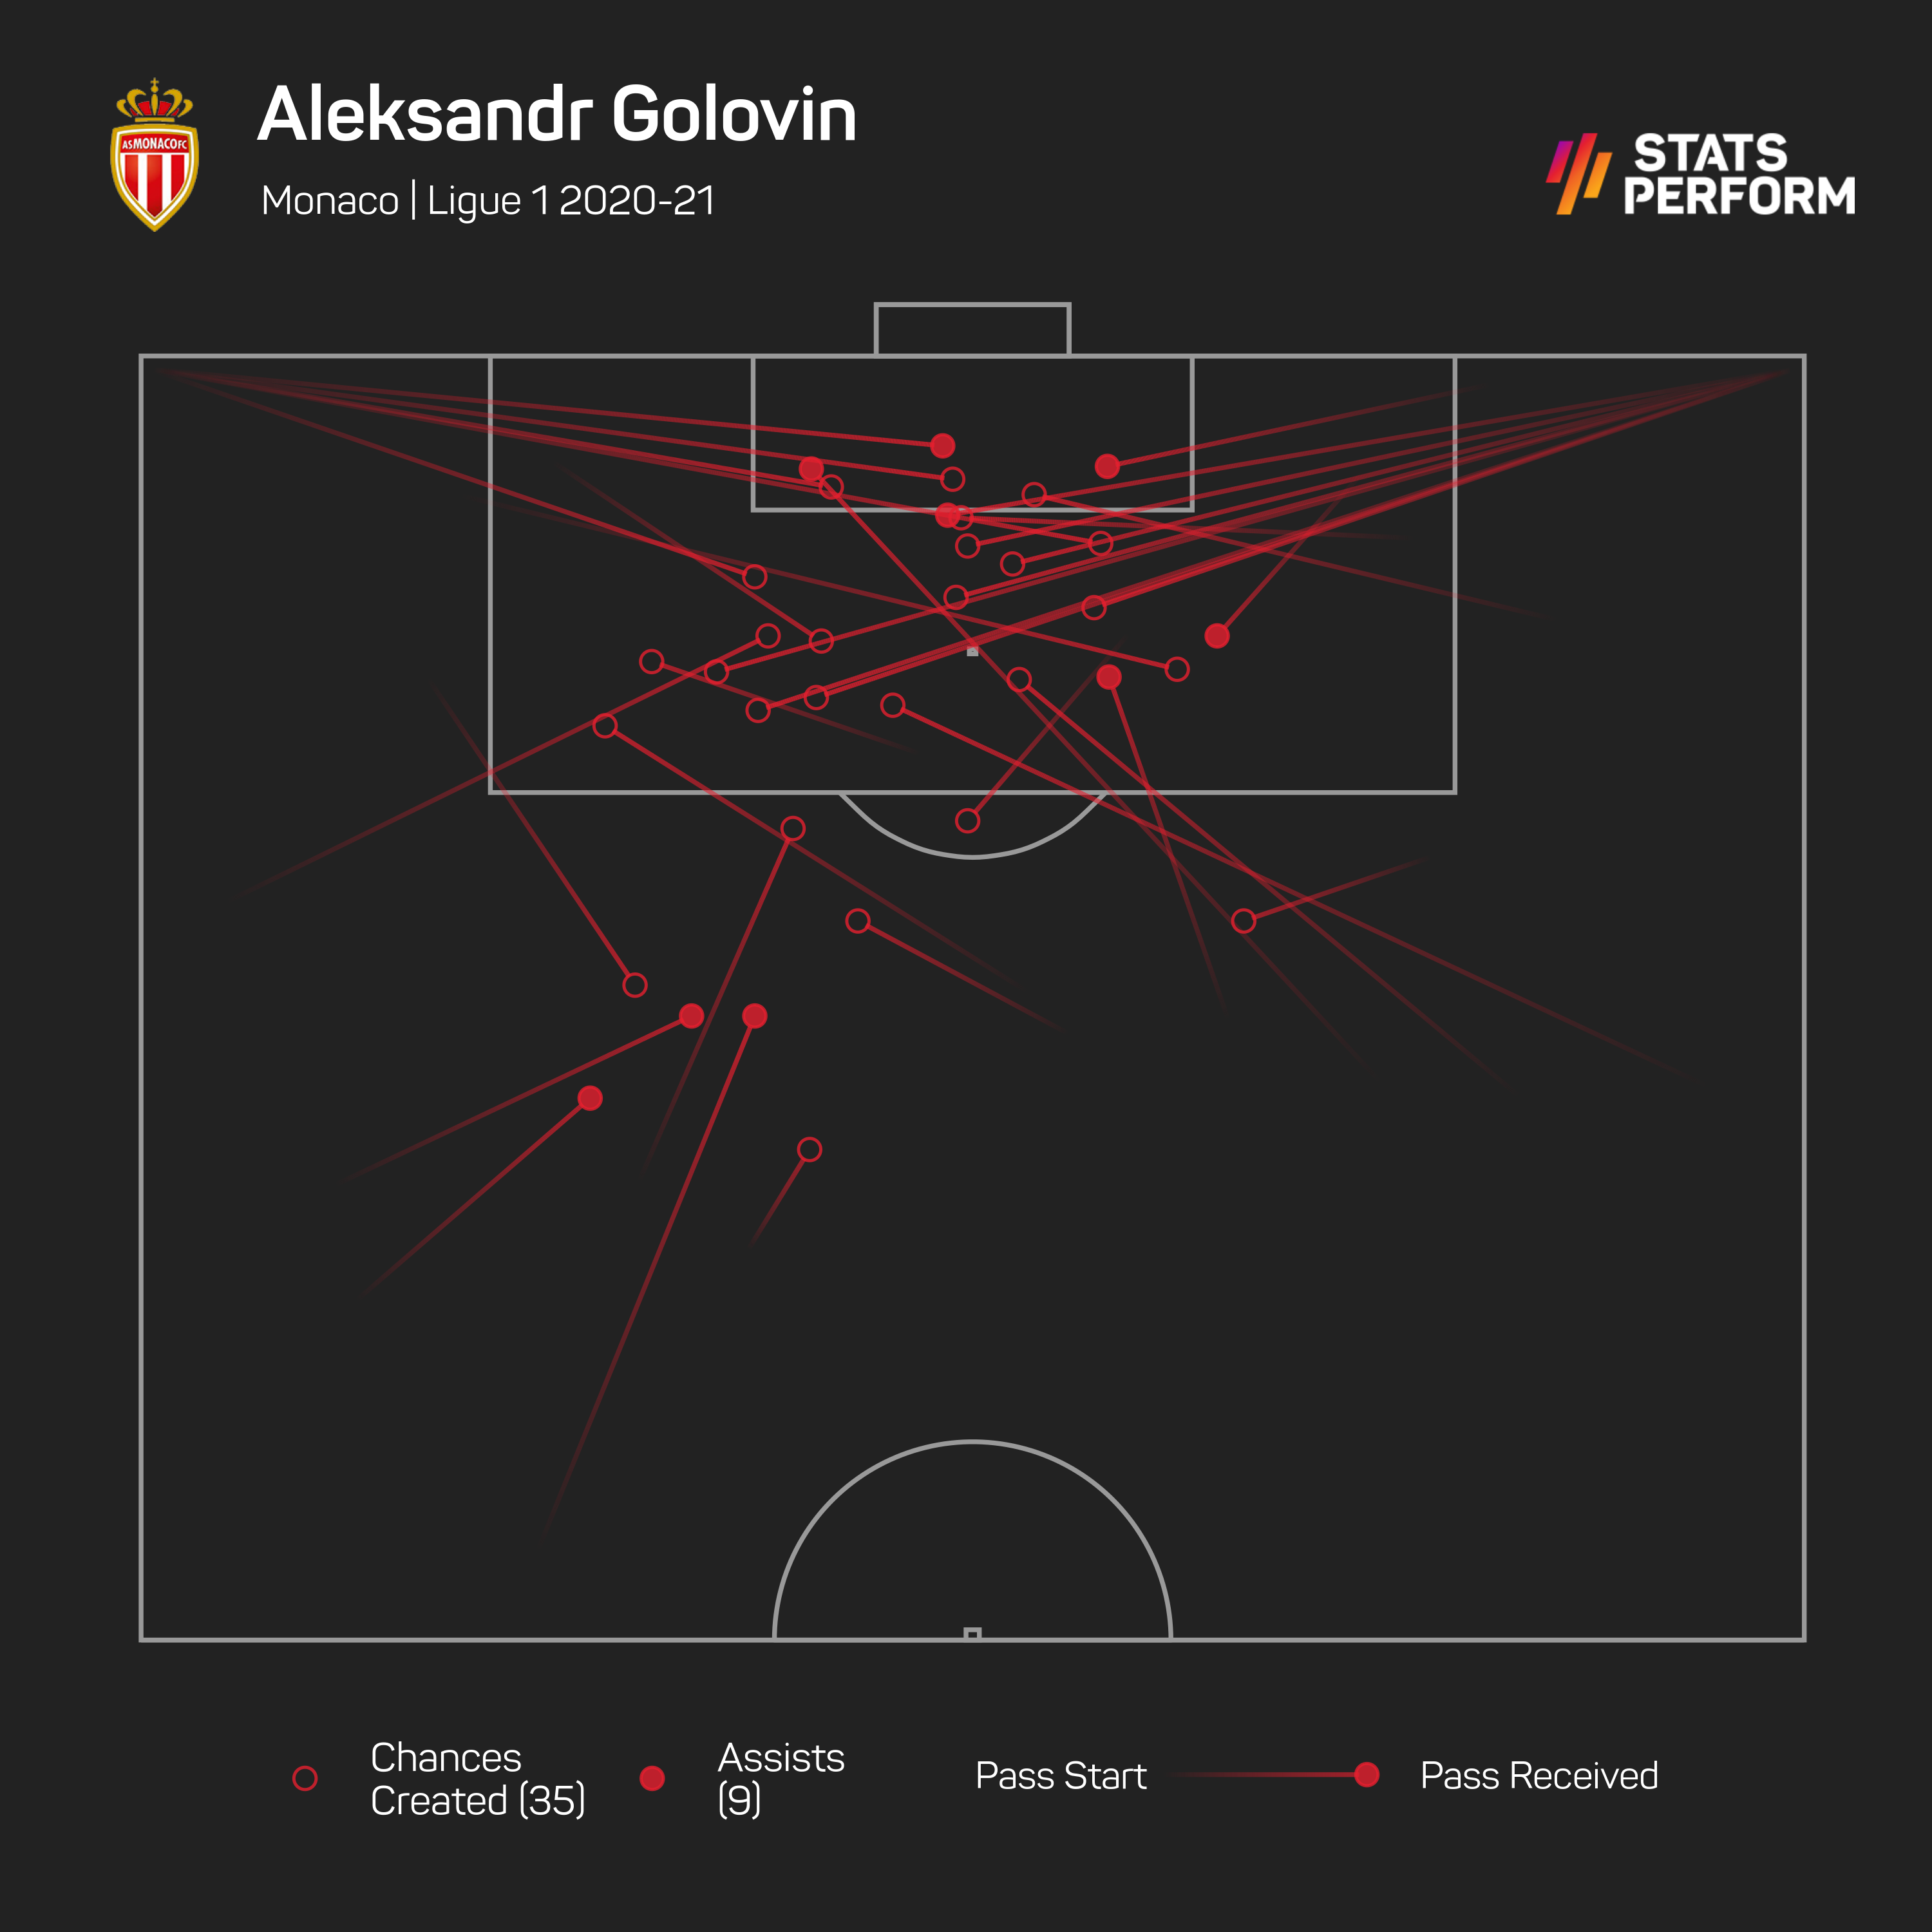 Aleksandr Golovin's set-pieces could be vital in a potentially tight group